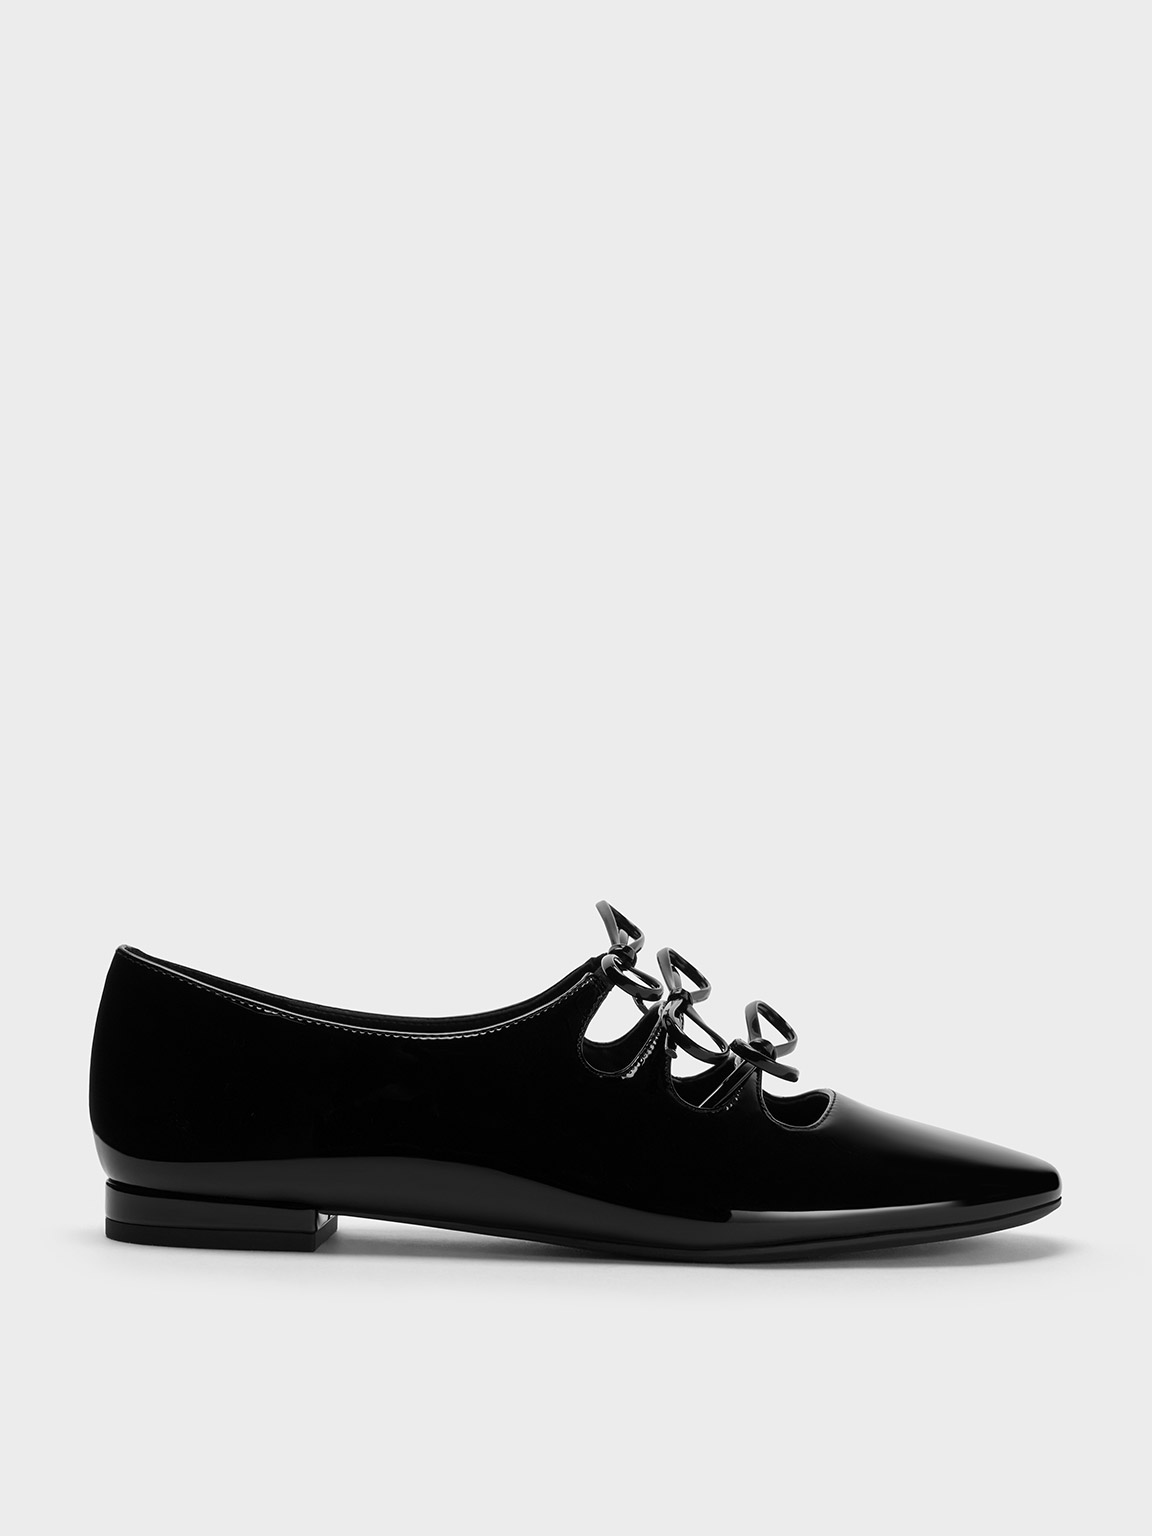 Charles & Keith Dorri Patent Triple-bow Ballet Flats In Black Patent